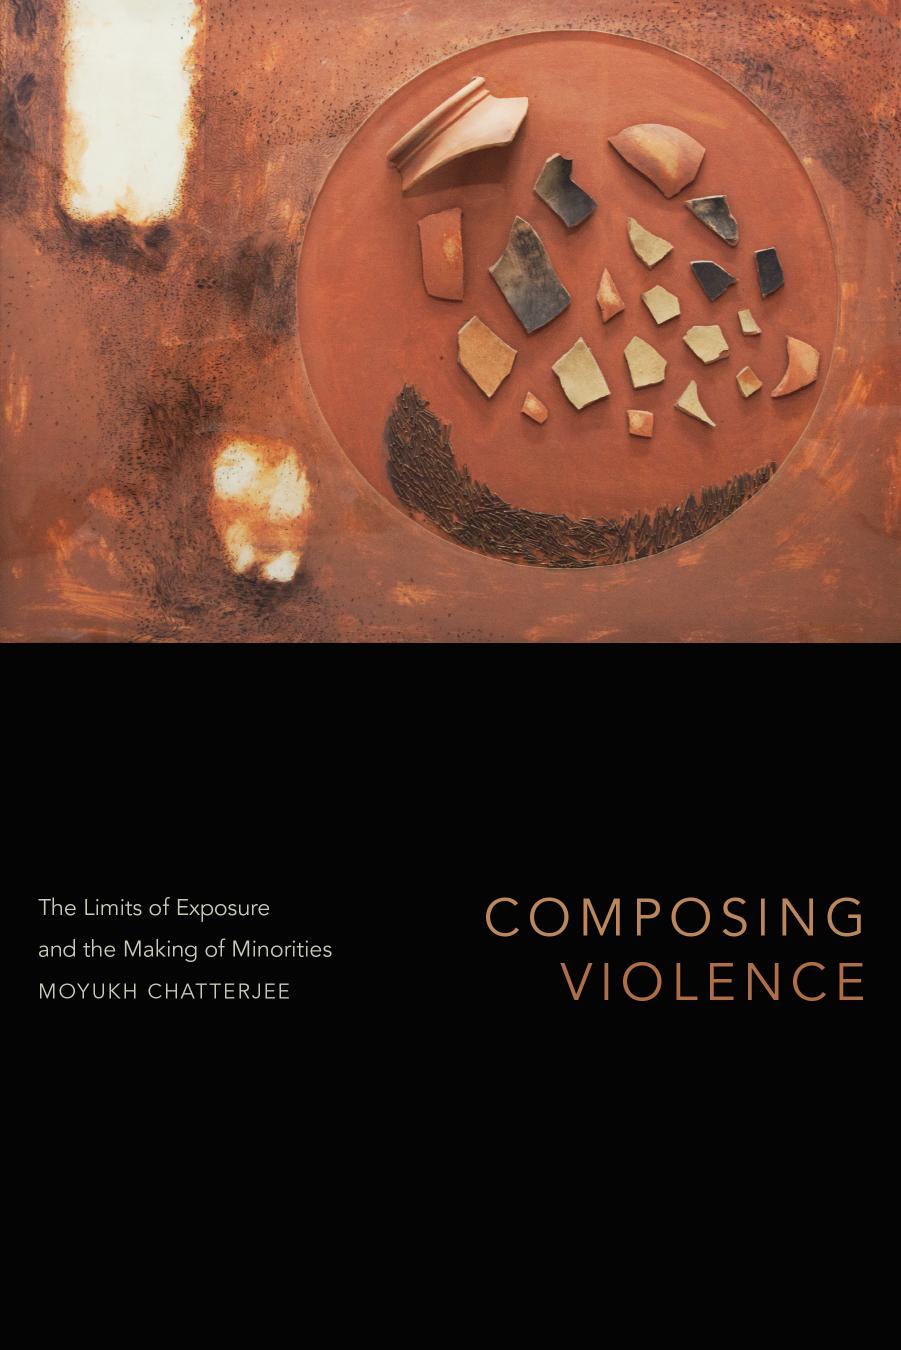 Composing Violence: The Limits of Exposure and the Making of Minorities by Moyukh Chatterjee